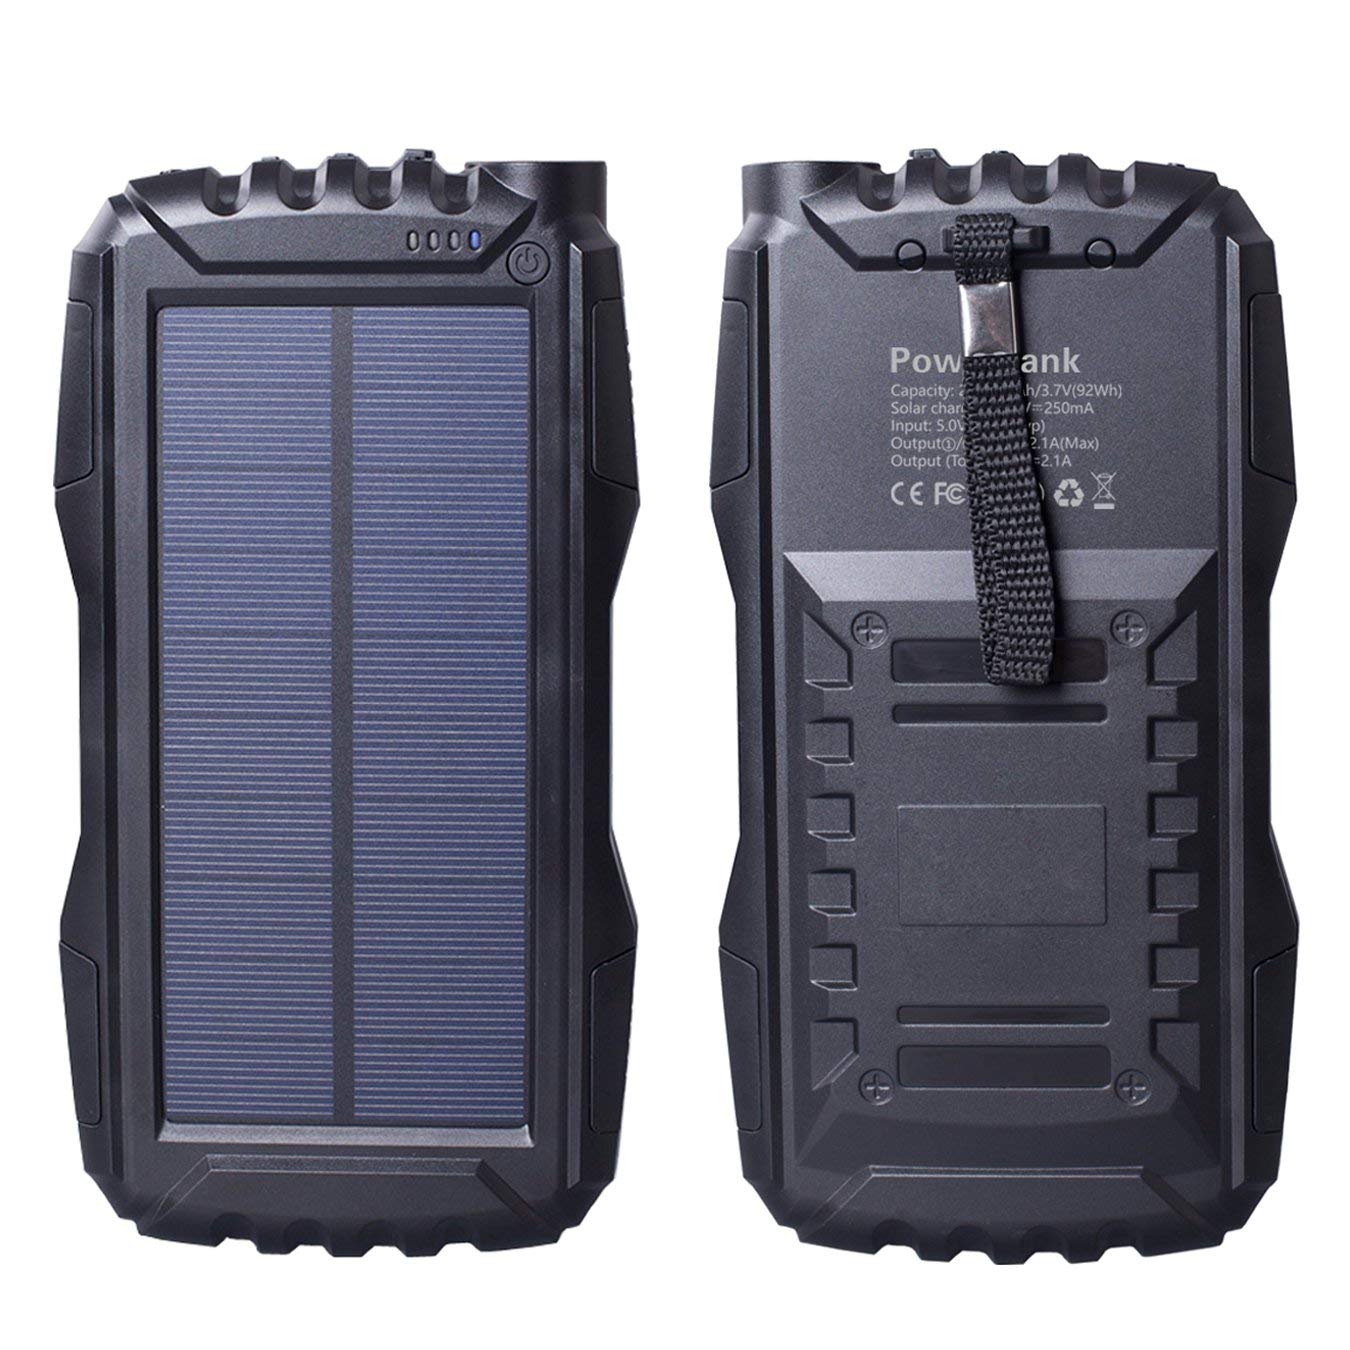 Solar Charger, Friengood Portable 25000mAh Solar Power Bank, Waterproof Solar External Battery Pack with Dual USB Ports and Flashlight for iPhone, iPad, Samsung, Android Phones and More (Black)